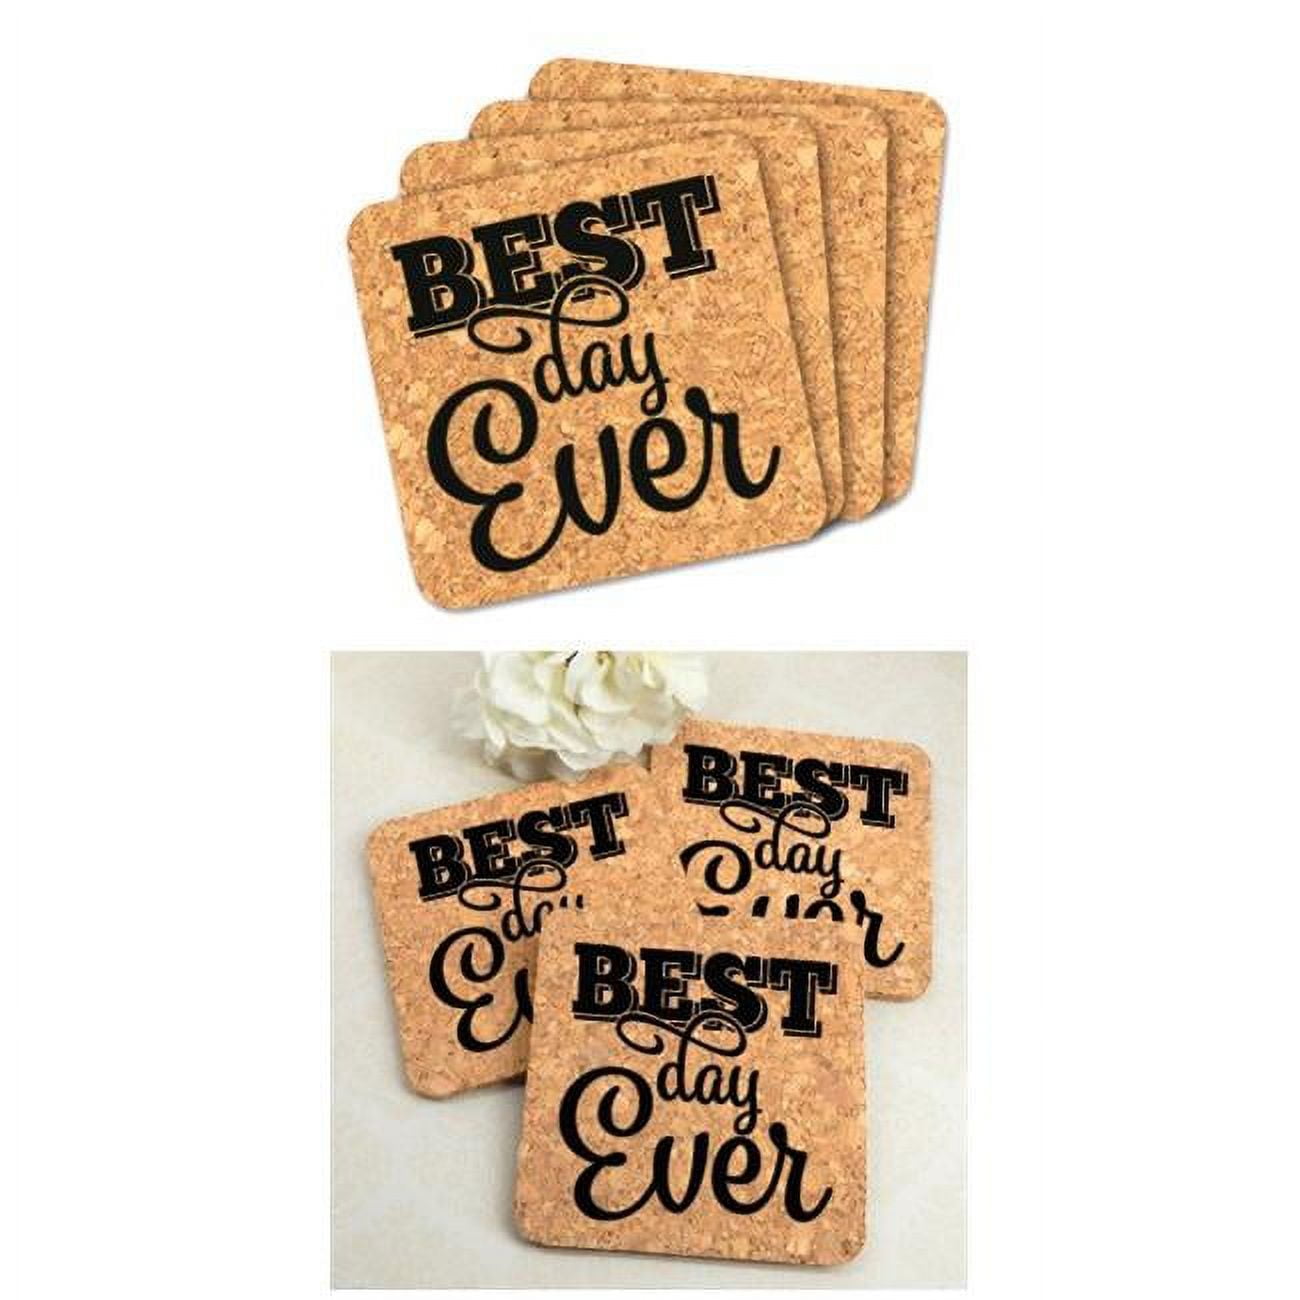 8407182 4 X 4 In. Best Day Ever Square Cork Coasters- Set Of 4